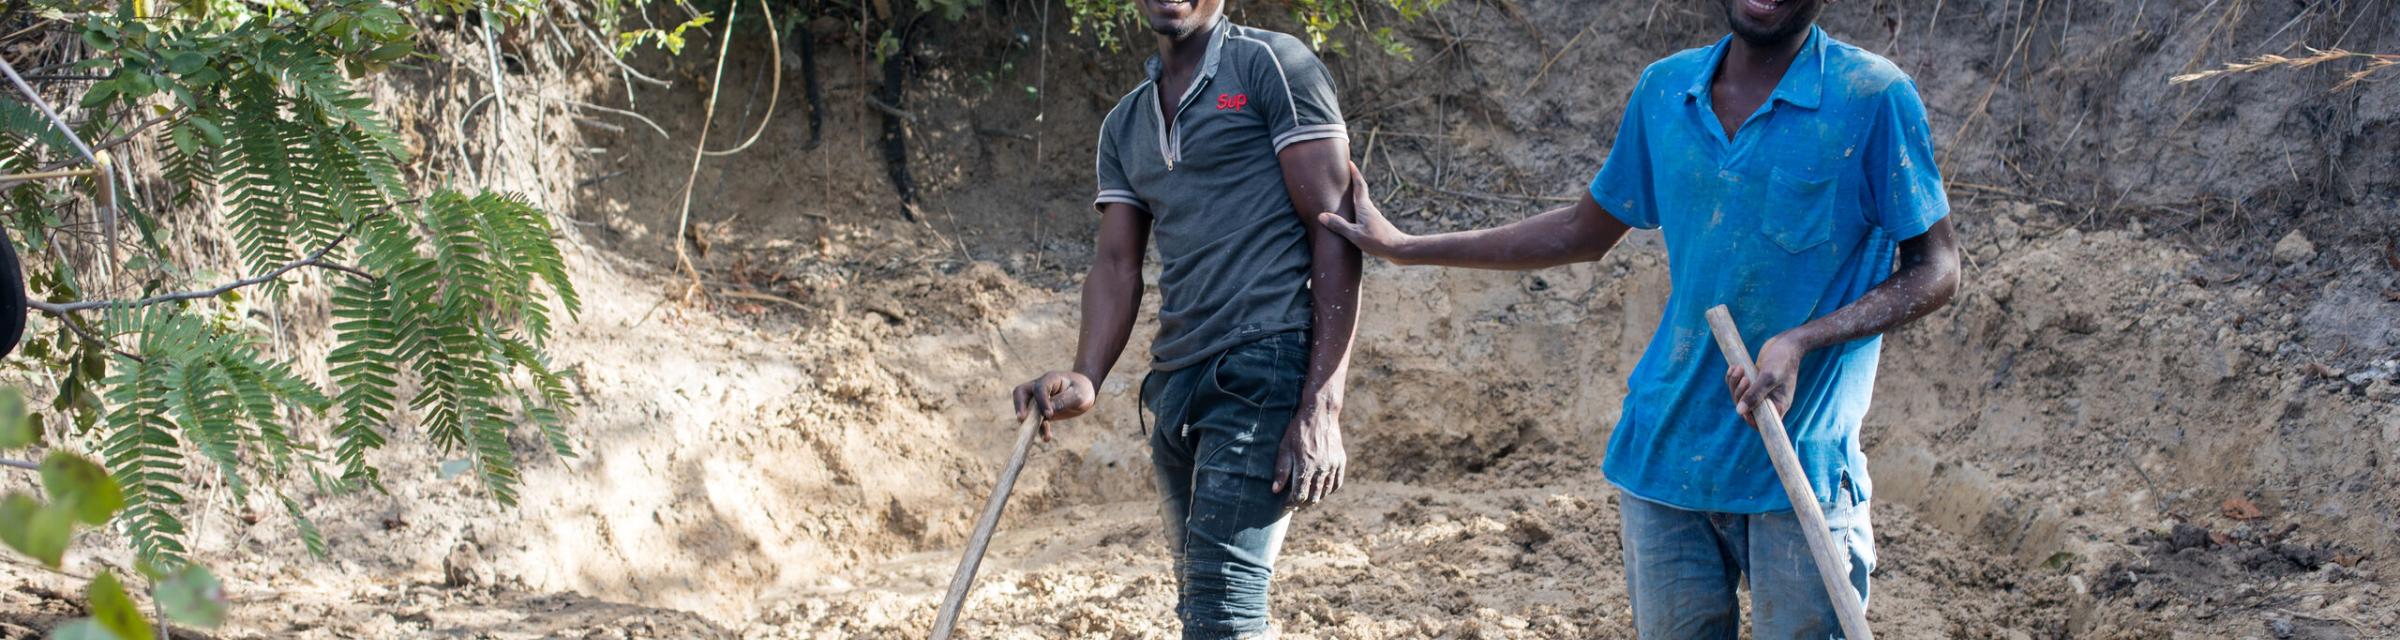 OMer John (right) with one of his disciples as they work the ground to make bricks.